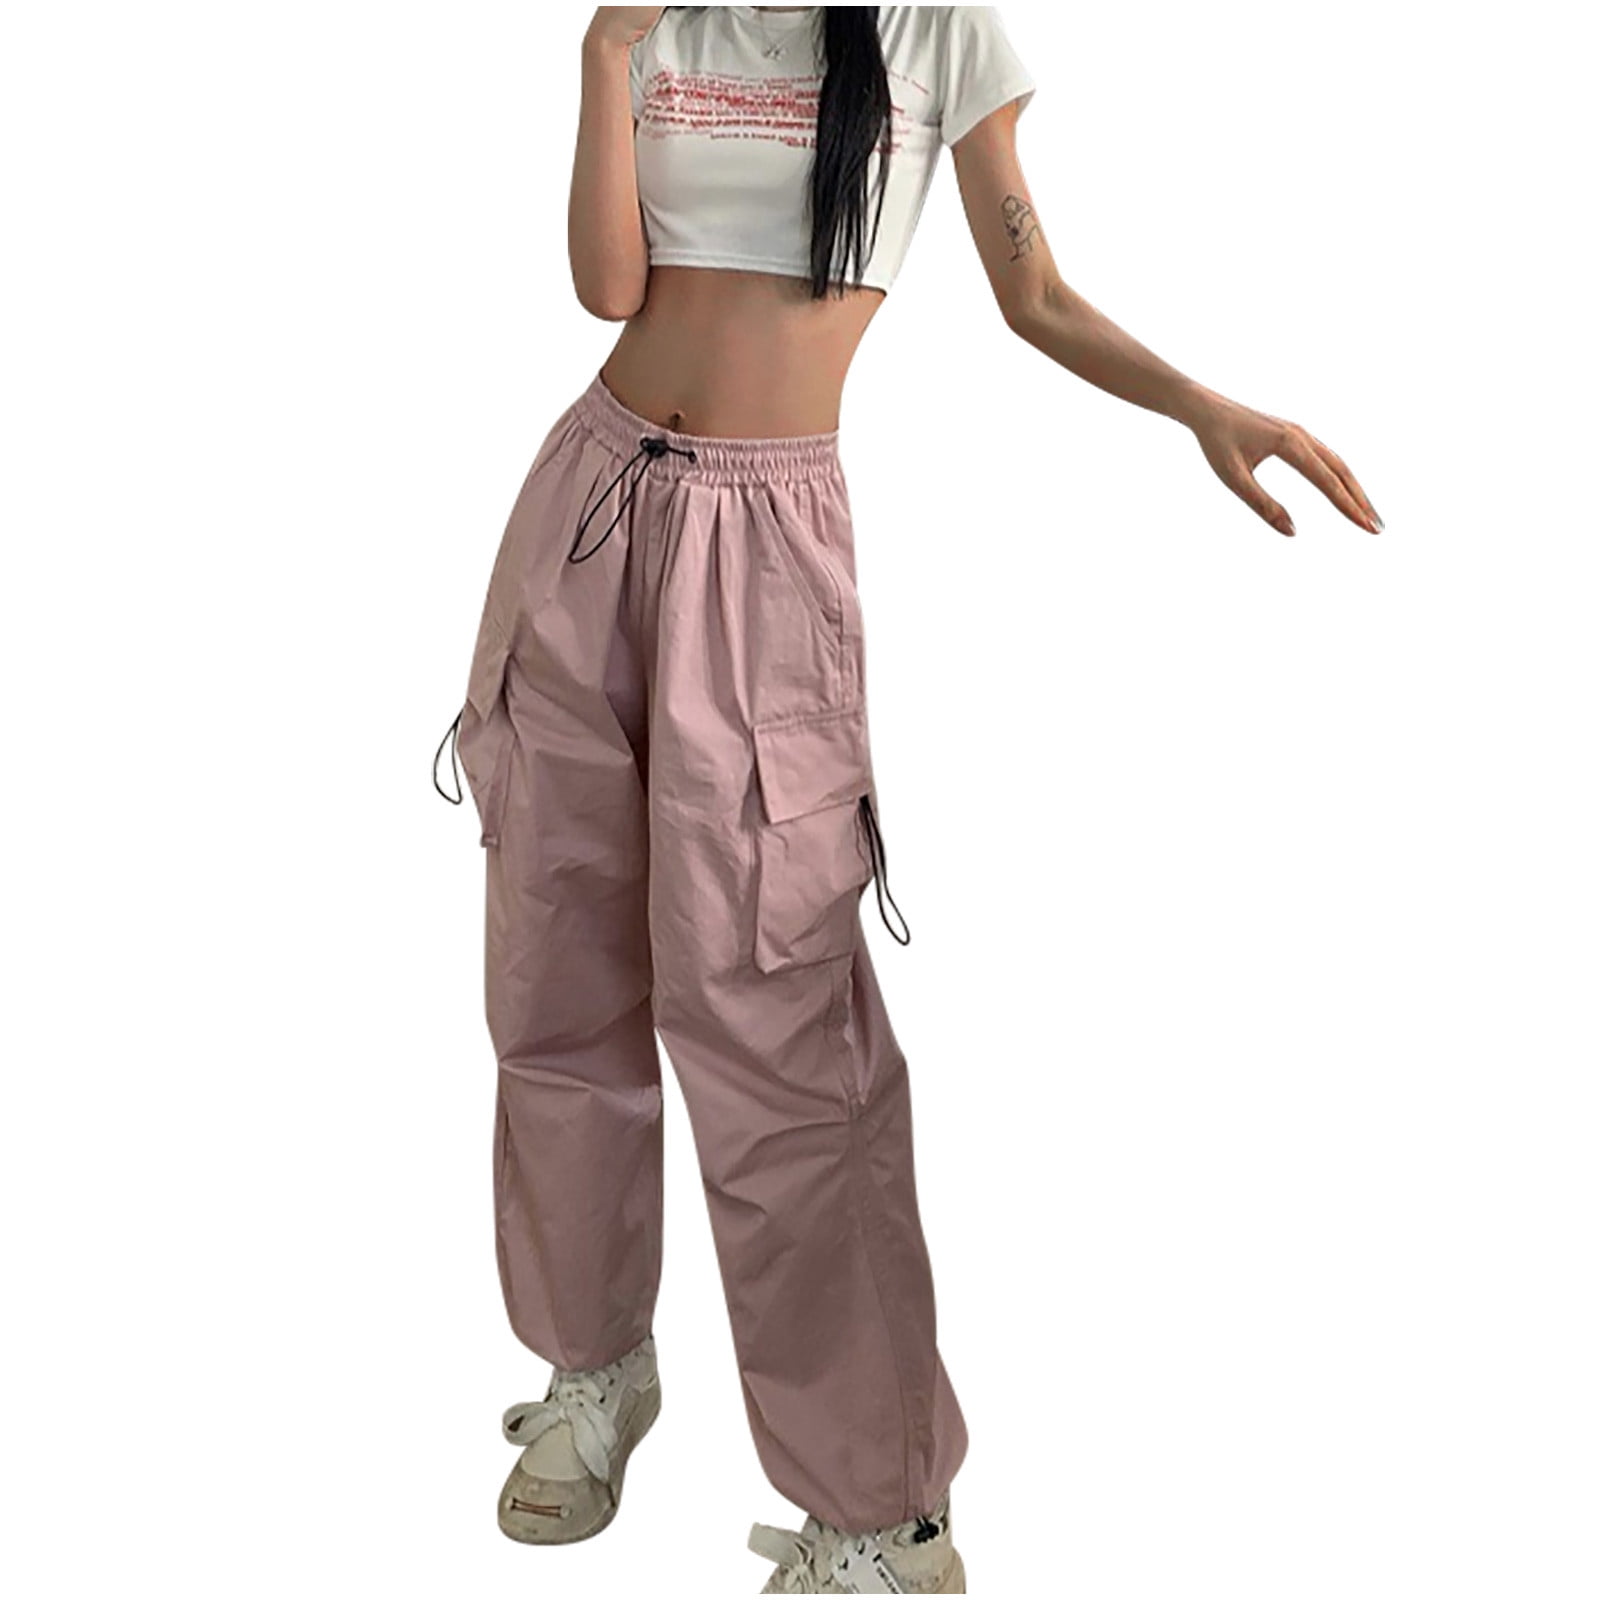 CaComMARK PI Capris/Cargo Pants for Women Plus Size Ladies Solid Hippie  Punk Trousers Streetwear Jogger Pocket Loose Overalls Long Trousers Pink 